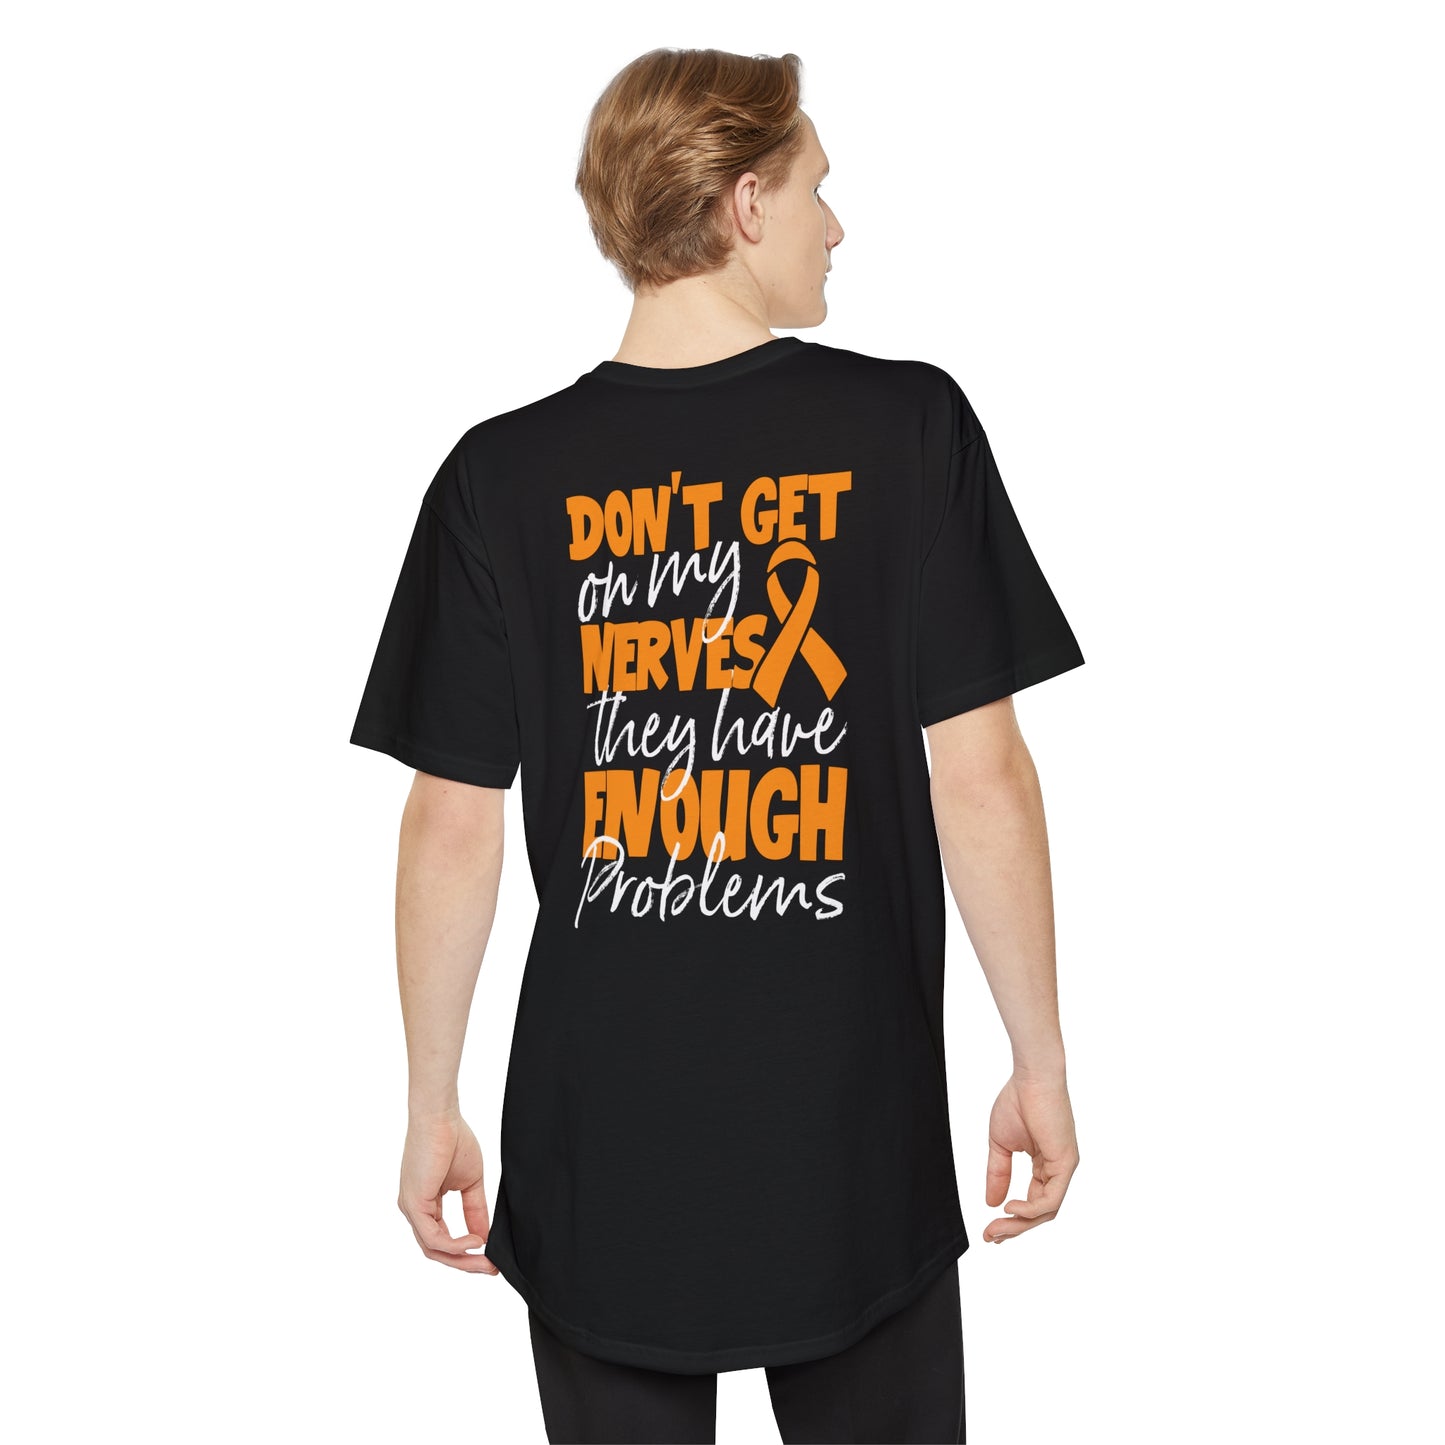 Unisex Long Body Urban Tee - Don't Get On My Nerves